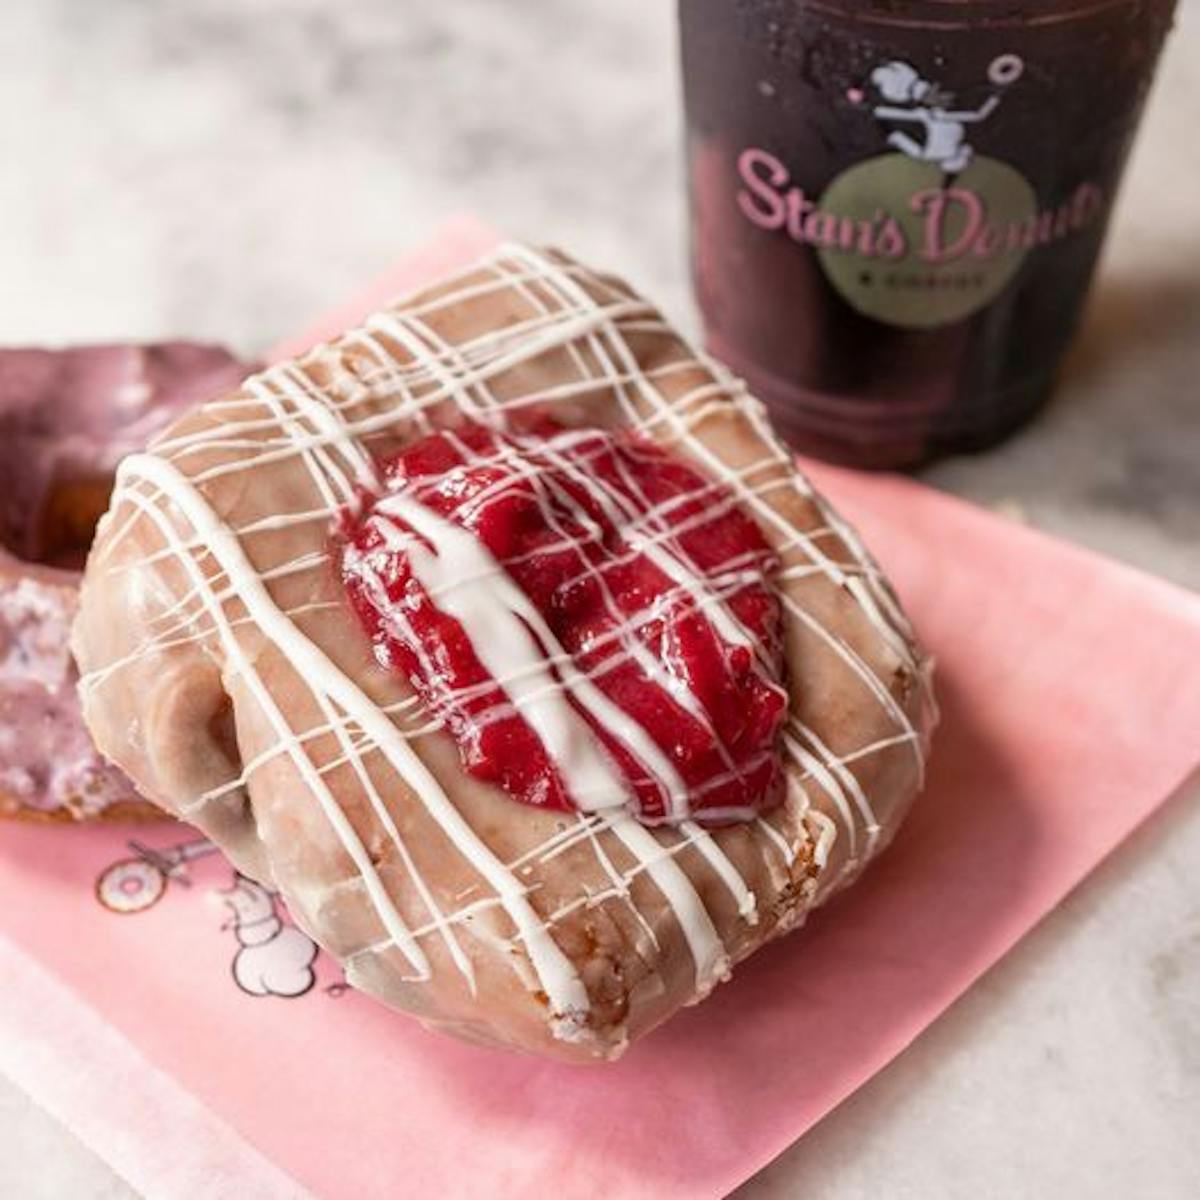 Cherry cream cheese pocket from Stan's Donuts sitting on a pink wrapper beside a clear plastic cup of coffee.